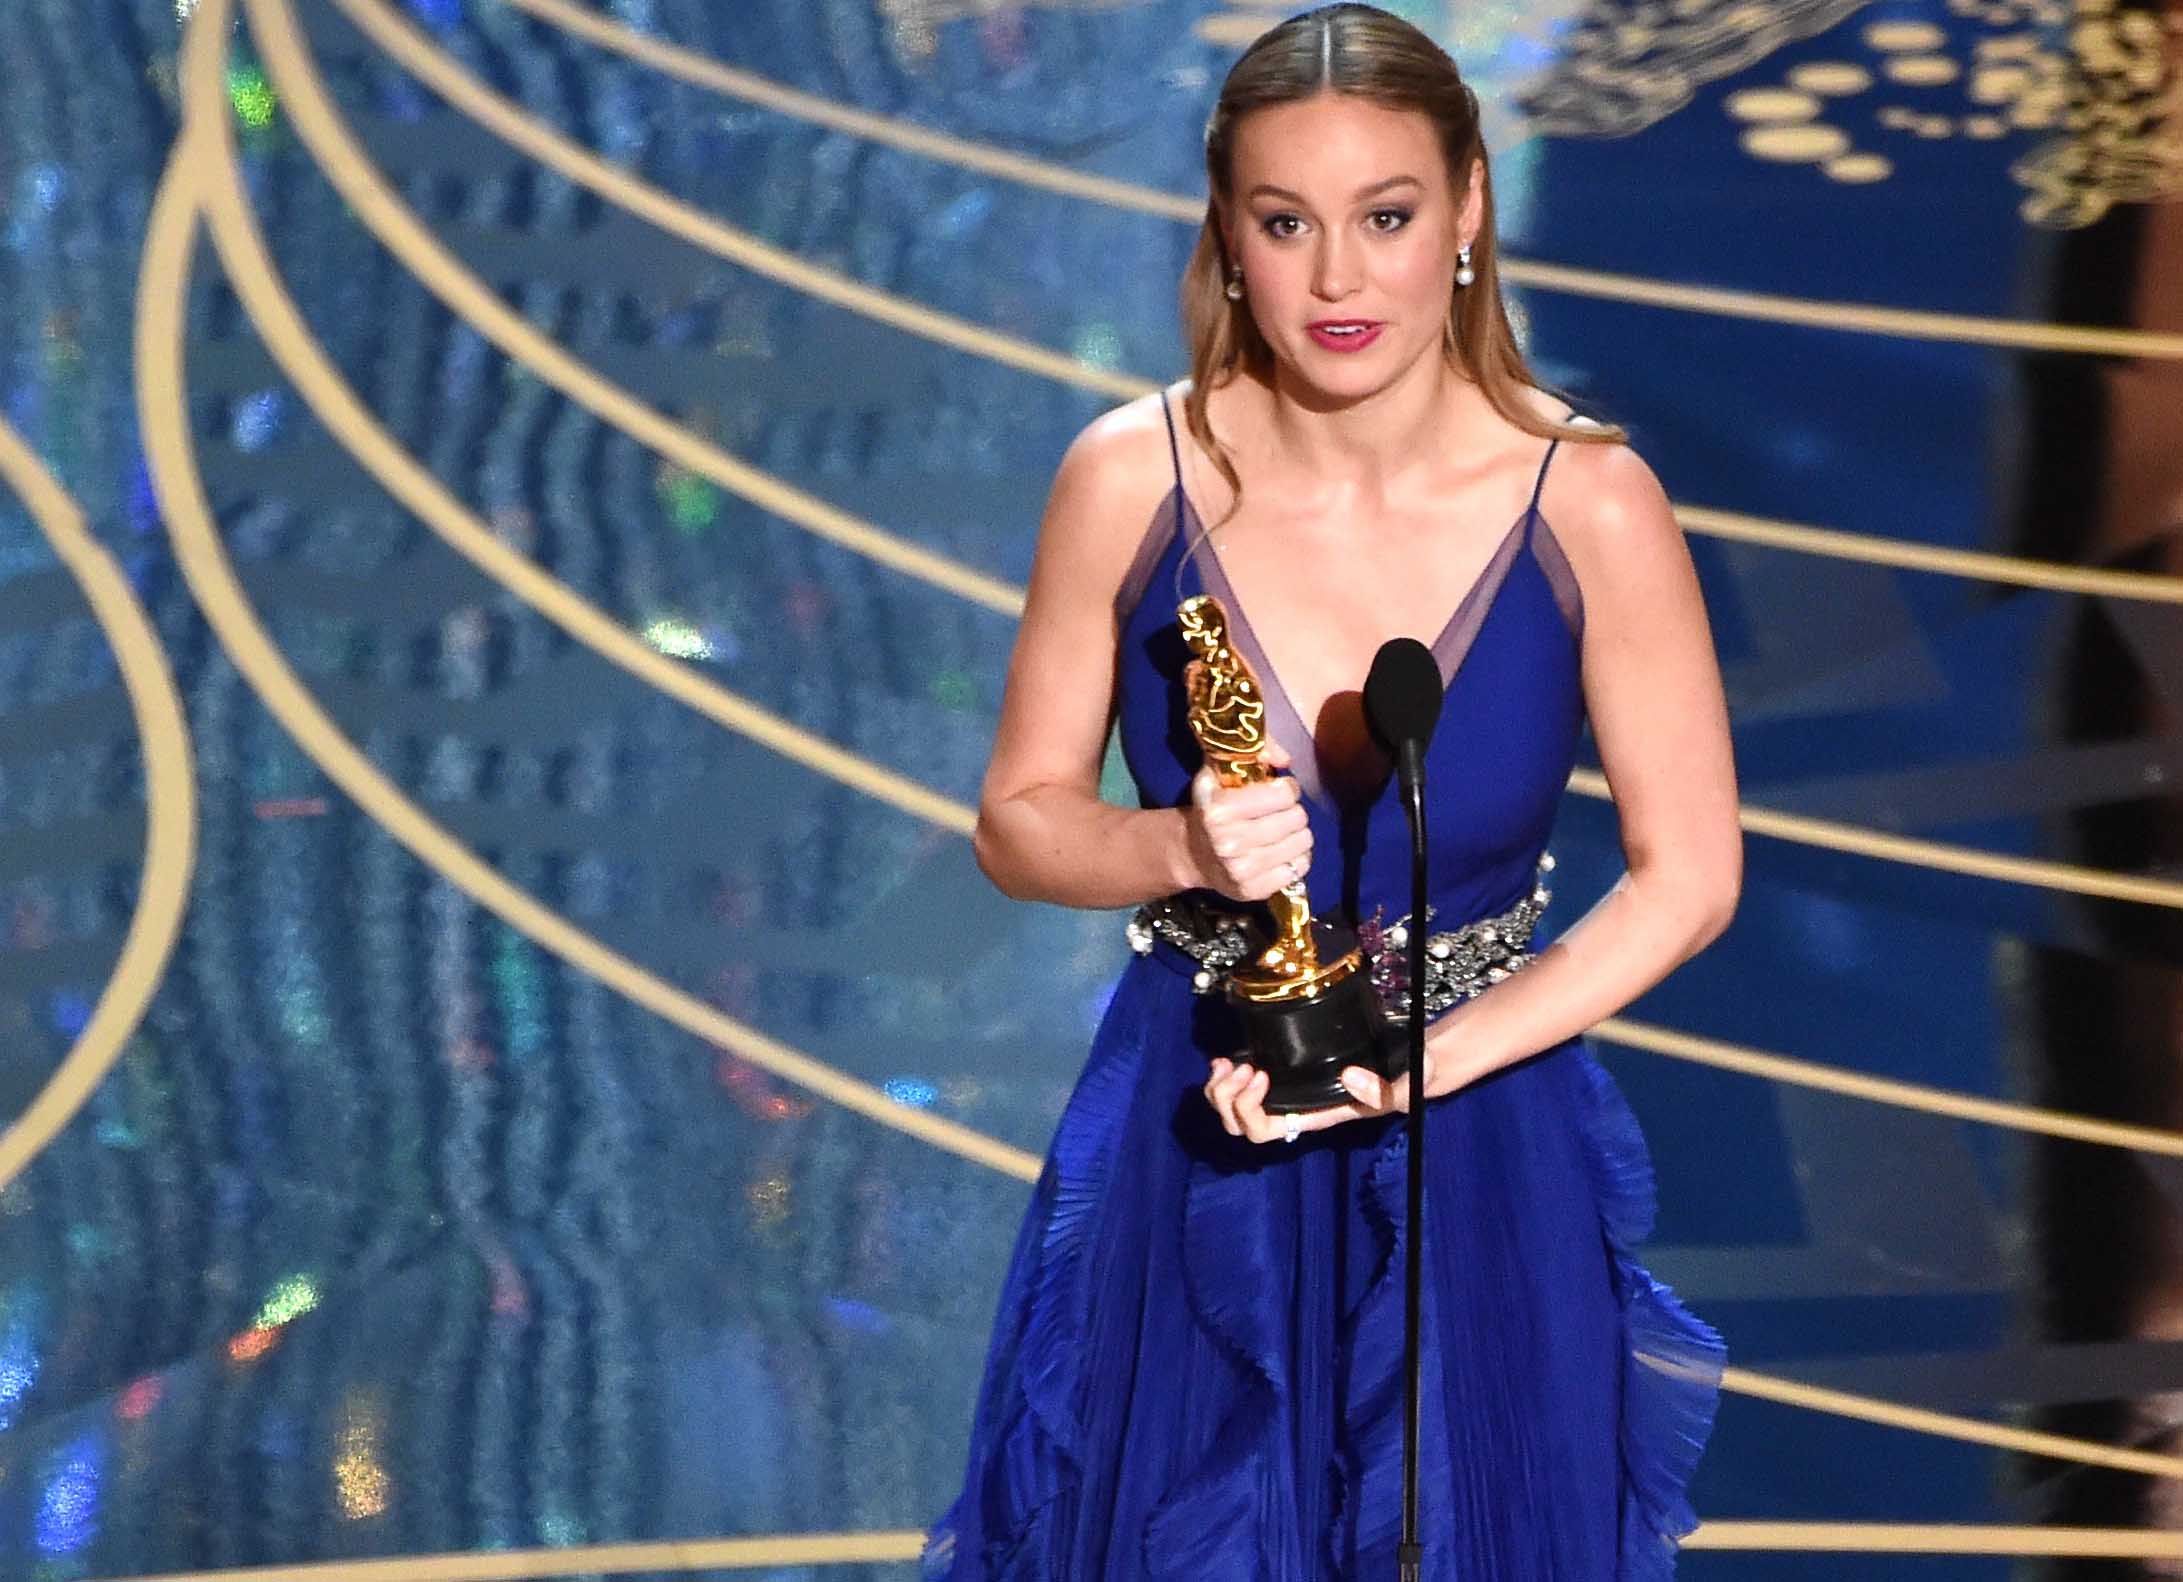 HOLLYWOOD, CA - FEBRUARY 28: Actress Brie Larson accepts the Best Actress award for 'Room' during the 88th Annual Academy Awards at the Dolby Theatre on February 28, 2016 in Hollywood, California. (Photo by Kevin Winter/Getty Images)